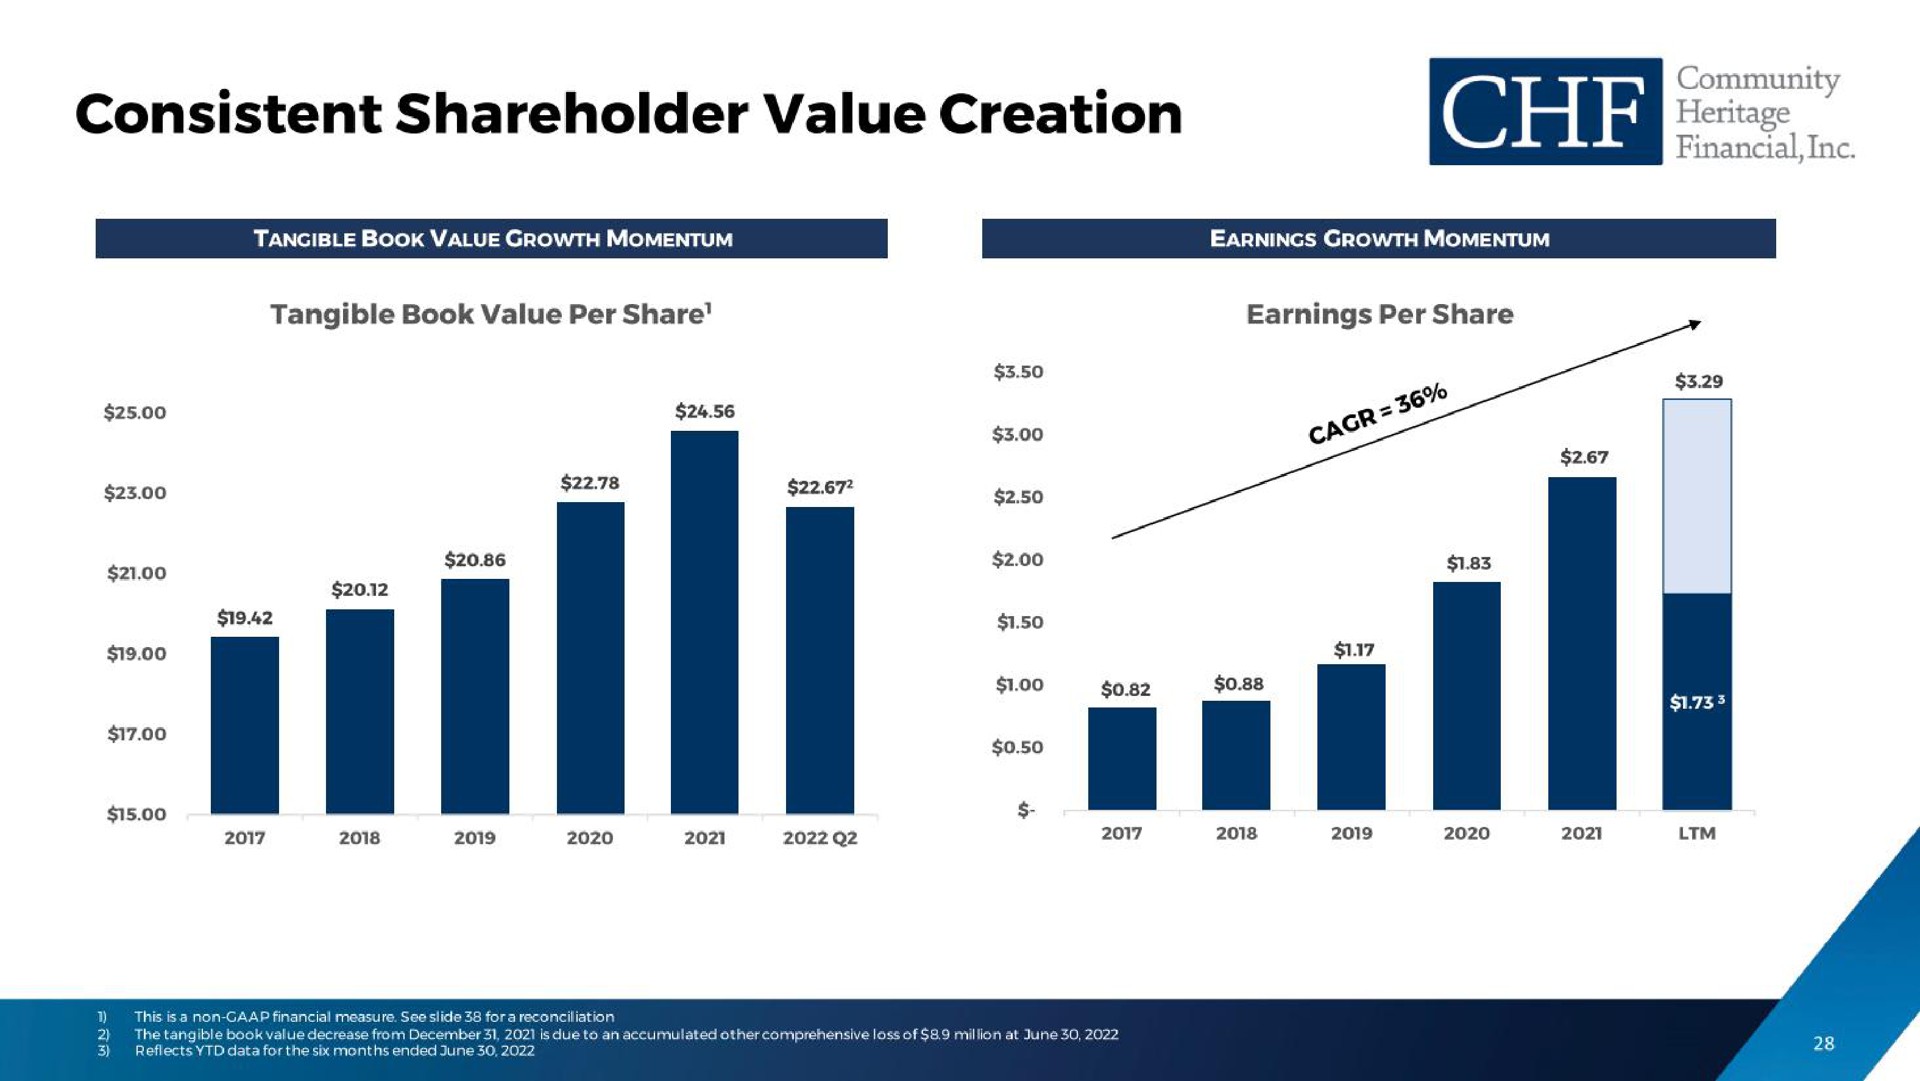 consistent shareholder value creation che heritage | Community Heritage Financial